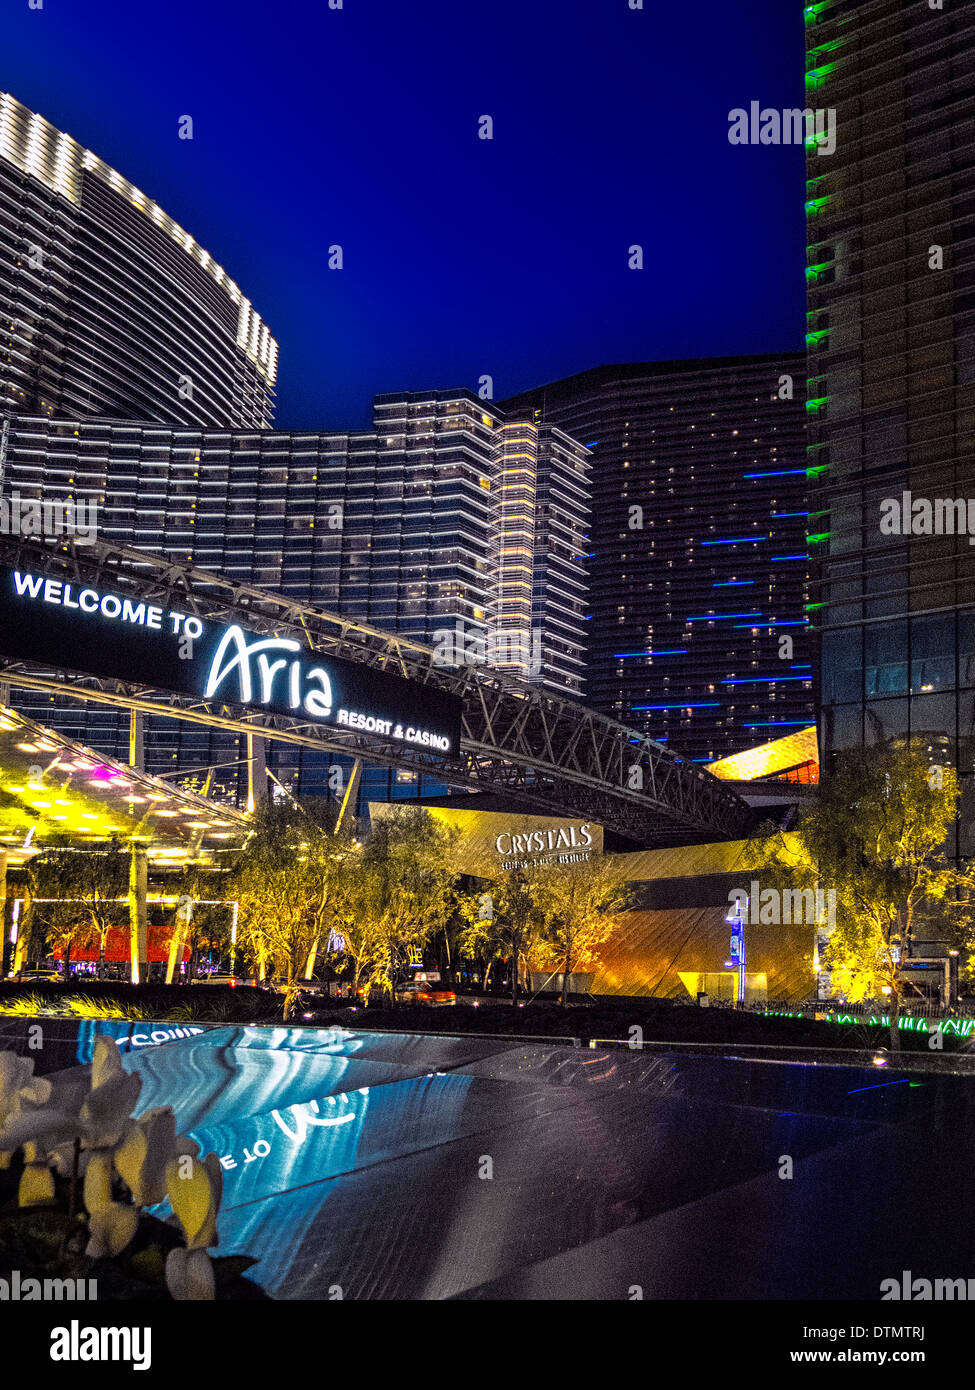 A dramatic night time view of the Aria Resort and Casino,Las Vegas Nevada Stock Photo